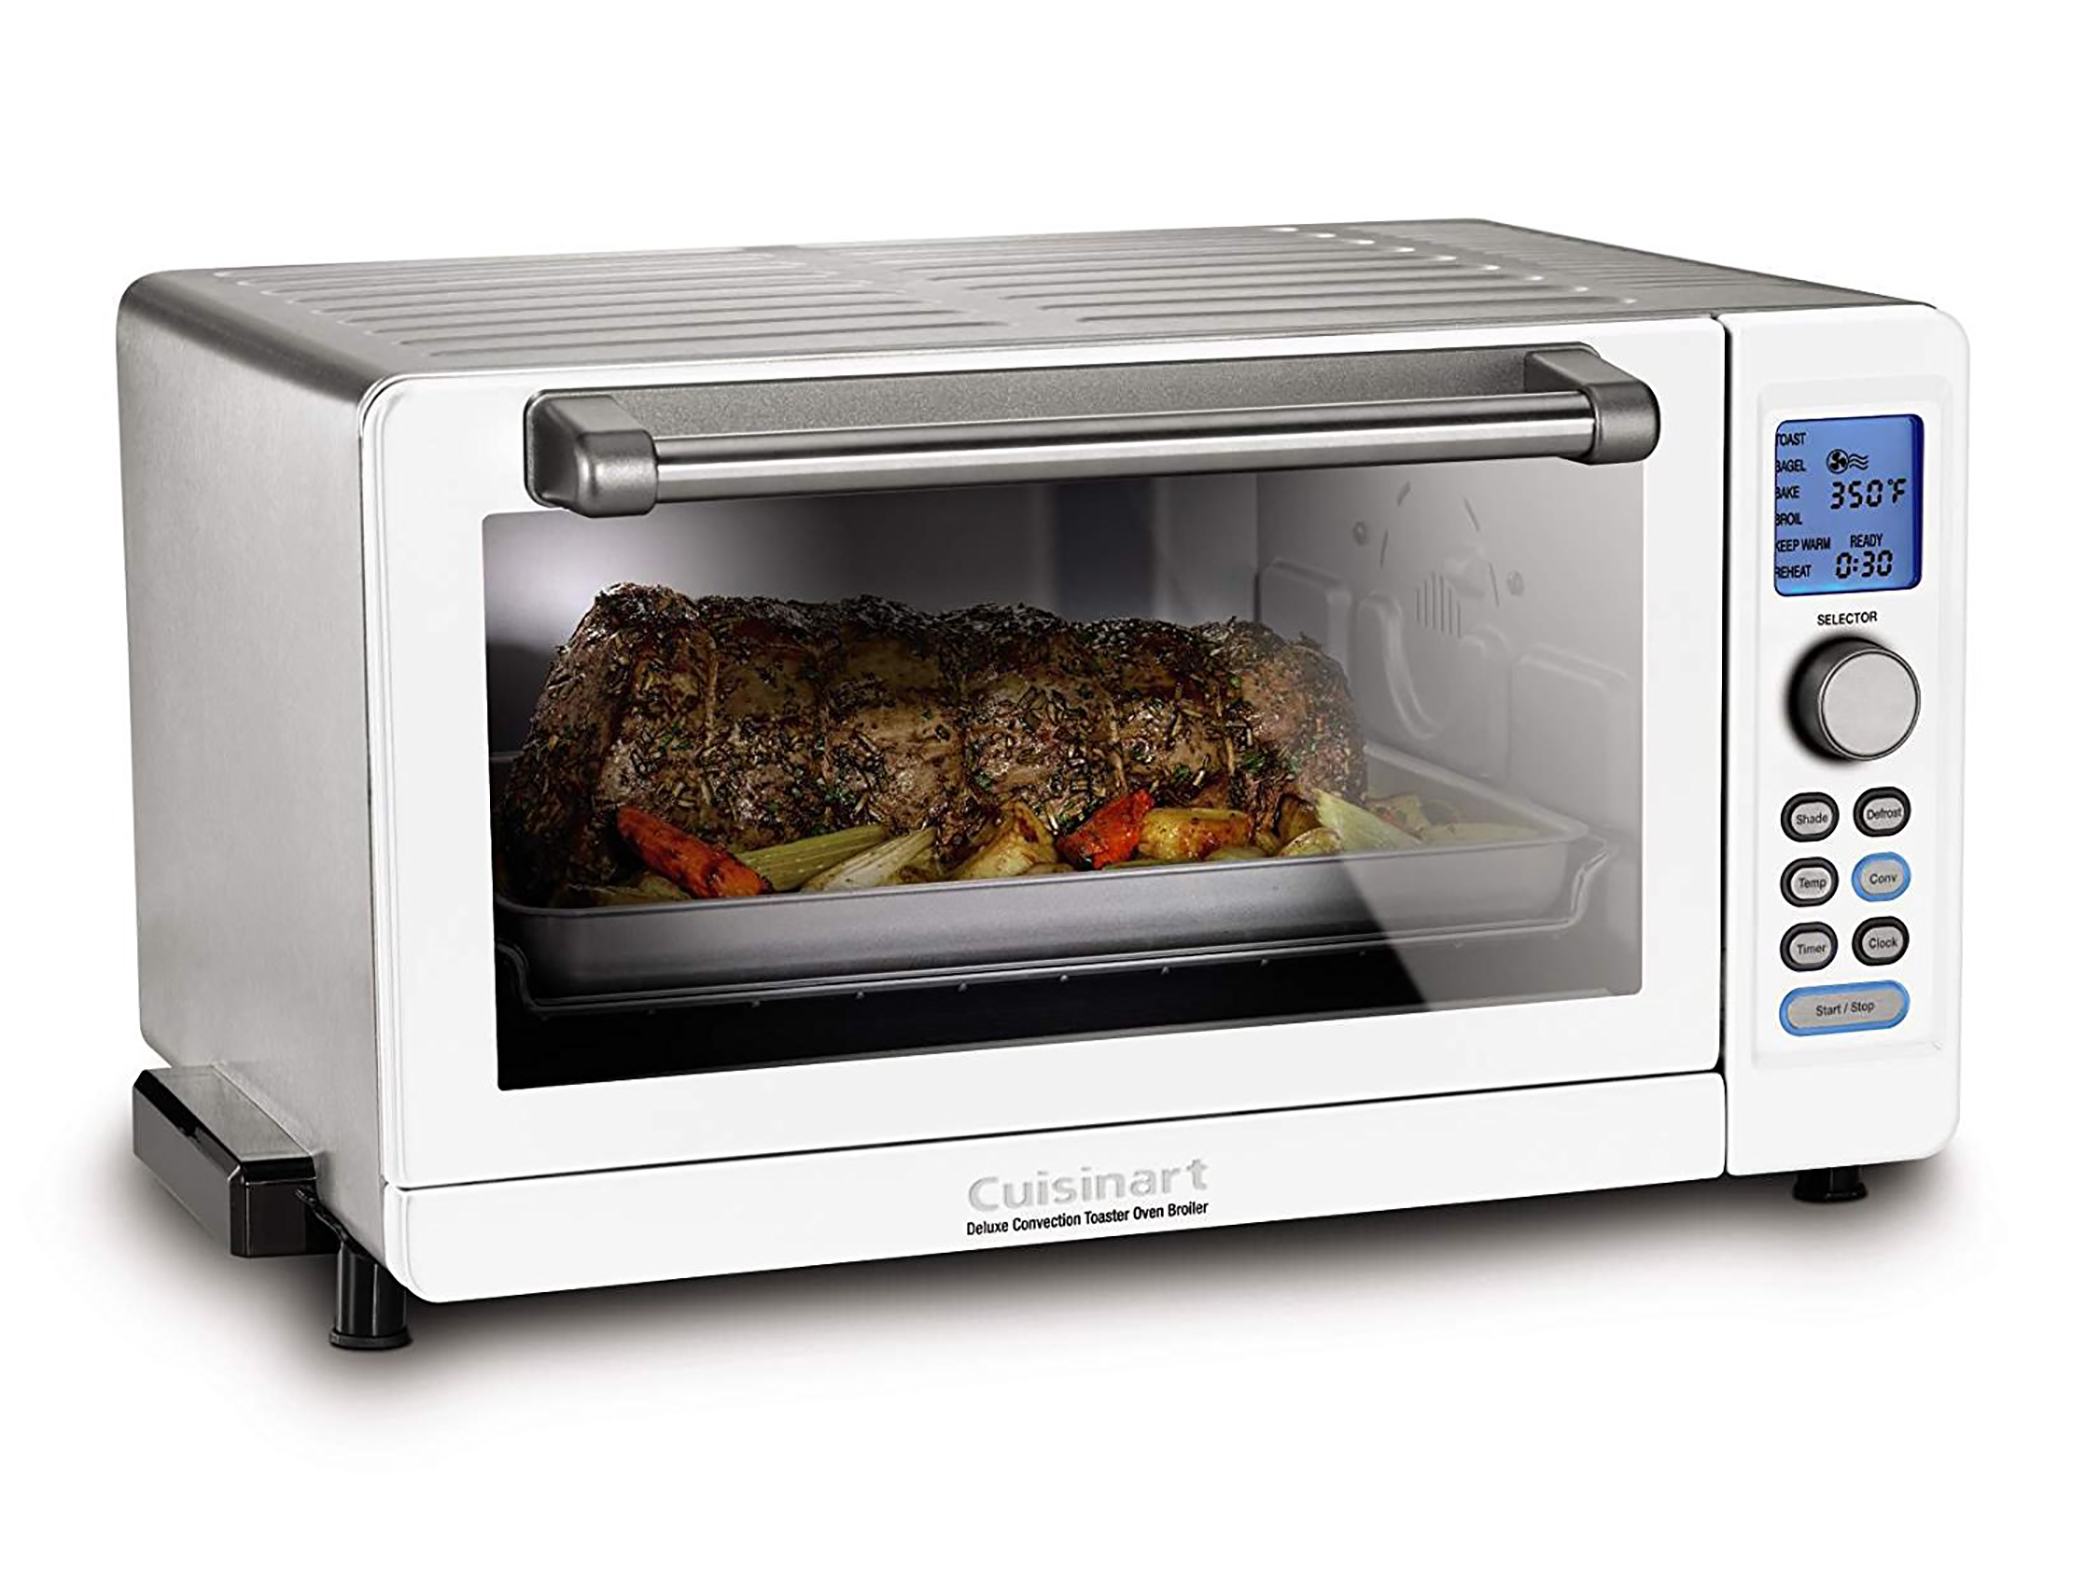 Cuisinart TOB-135WN Deluxe Convection Toaster Oven Broiler, Stainless Steel - image 3 of 3